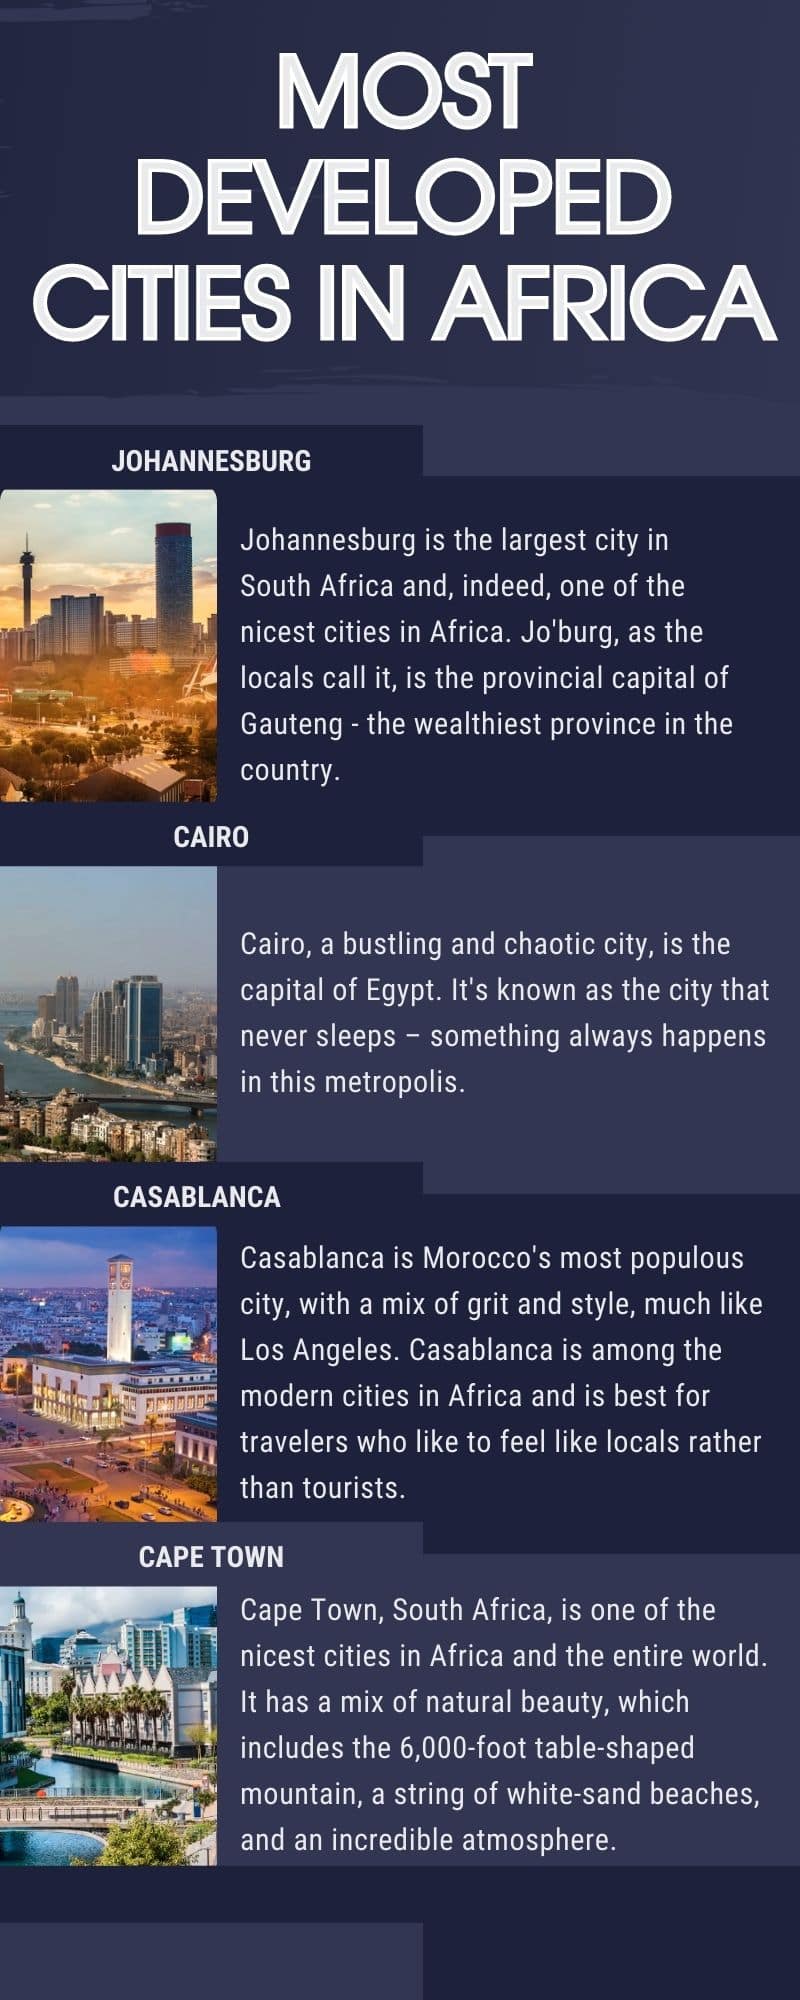 Most developed cities in Africa